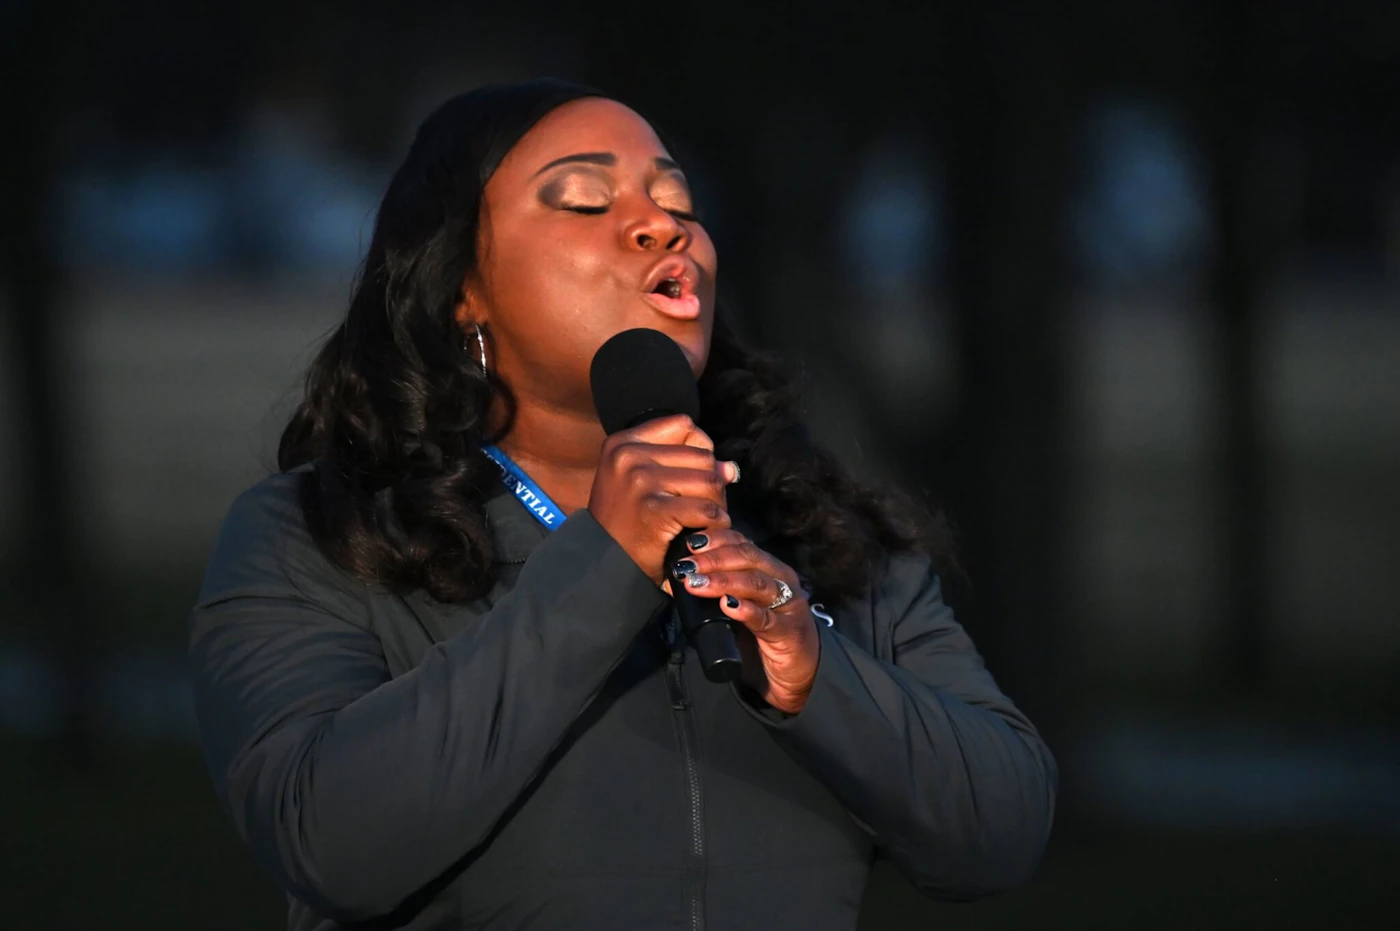 Michigan nurse Lori Marie Key of Saint Joseph Mercy Health System sings Amazing Grace during a Covid-19 Memorial at the Lincoln Memorial in Washington, DC, on January 19, 2021 to honor the lives of those lost to Covid-19. (Photo by JIM WATSON / AFP) (Photo by JIM WATSON/AFP via Getty Images)